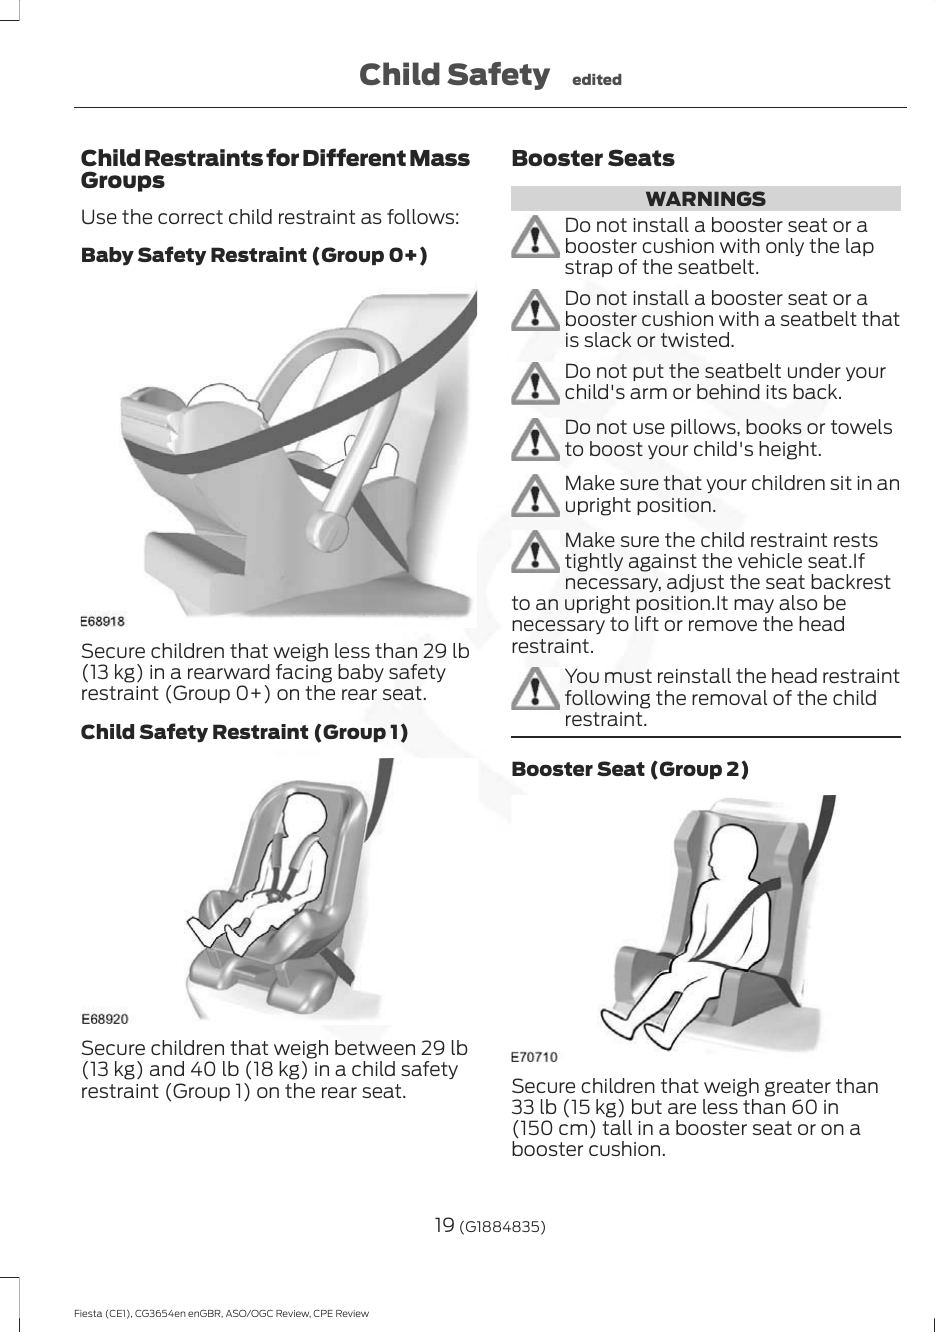 Child Restraints for Different MassGroupsUse the correct child restraint as follows:Baby Safety Restraint (Group 0+)Secure children that weigh less than 29 lb(13 kg) in a rearward facing baby safetyrestraint (Group 0+) on the rear seat.Child Safety Restraint (Group 1)Secure children that weigh between 29 lb(13 kg) and 40 lb (18 kg) in a child safetyrestraint (Group 1) on the rear seat.Booster SeatsWARNINGSDo not install a booster seat or abooster cushion with only the lapstrap of the seatbelt.Do not install a booster seat or abooster cushion with a seatbelt thatis slack or twisted.Do not put the seatbelt under yourchild&apos;s arm or behind its back.Do not use pillows, books or towelsto boost your child&apos;s height.Make sure that your children sit in anupright position.Make sure the child restraint reststightly against the vehicle seat.Ifnecessary, adjust the seat backrestto an upright position.It may also benecessary to lift or remove the headrestraint.You must reinstall the head restraintfollowing the removal of the childrestraint.Booster Seat (Group 2)Secure children that weigh greater than33 lb (15 kg) but are less than 60 in(150 cm) tall in a booster seat or on abooster cushion.19 (G1884835)Fiesta (CE1), CG3654en enGBR, ASO/OGC Review, CPE ReviewChild Safety edited